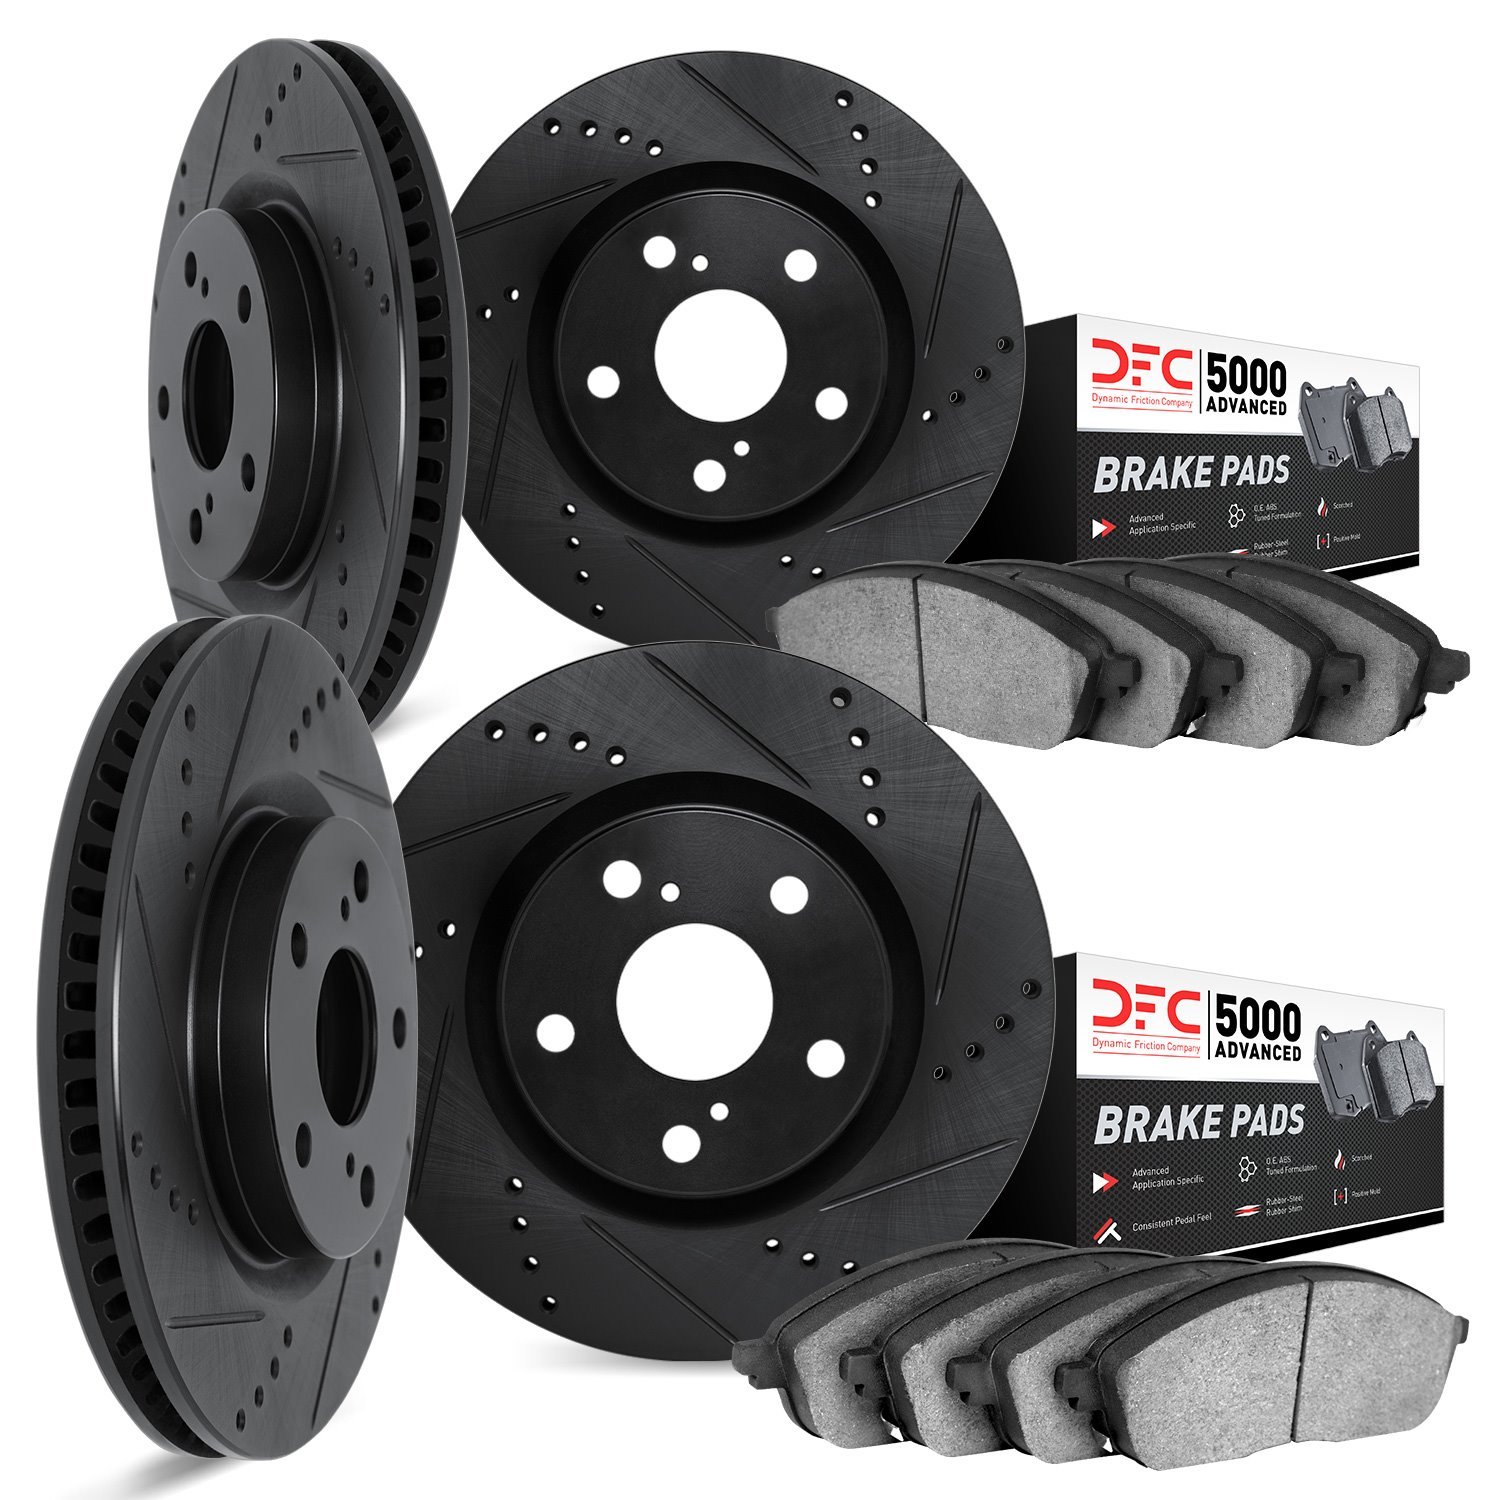 8504-46043 Drilled/Slotted Brake Rotors w/5000 Advanced Brake Pads Kit [Black], 2016-2019 GM, Position: Front and Rear